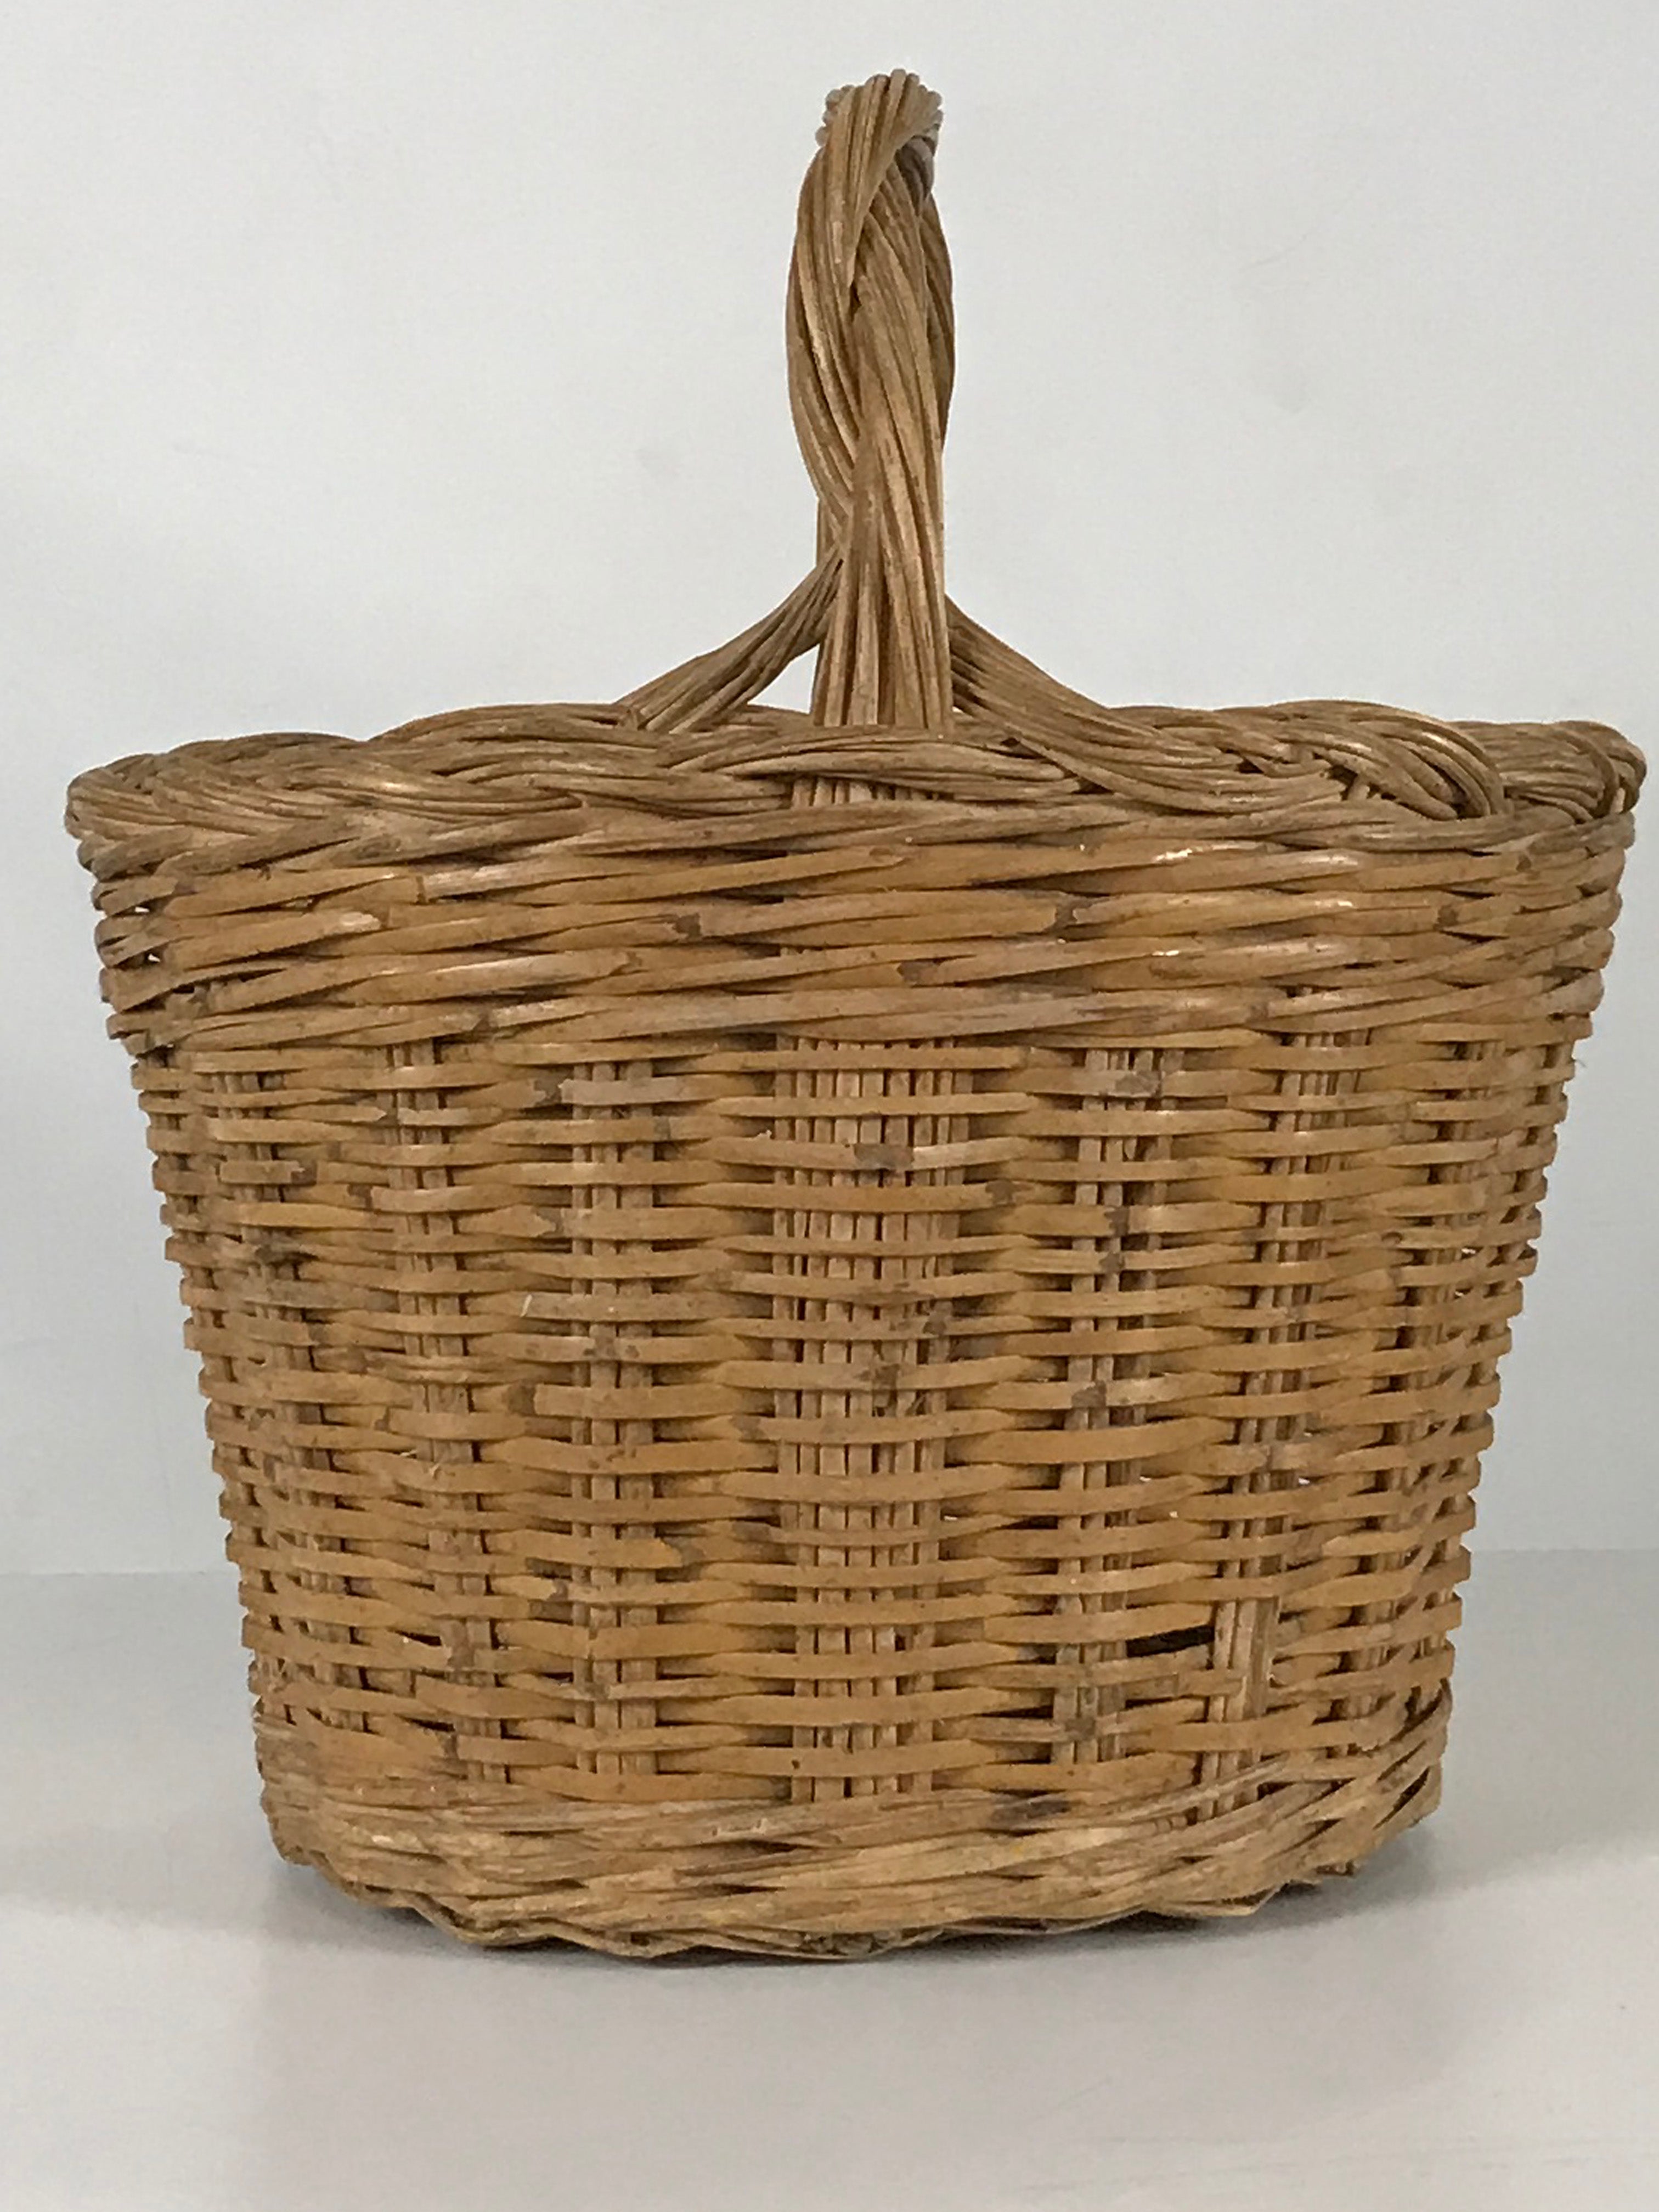 Wicker Basket with Handle